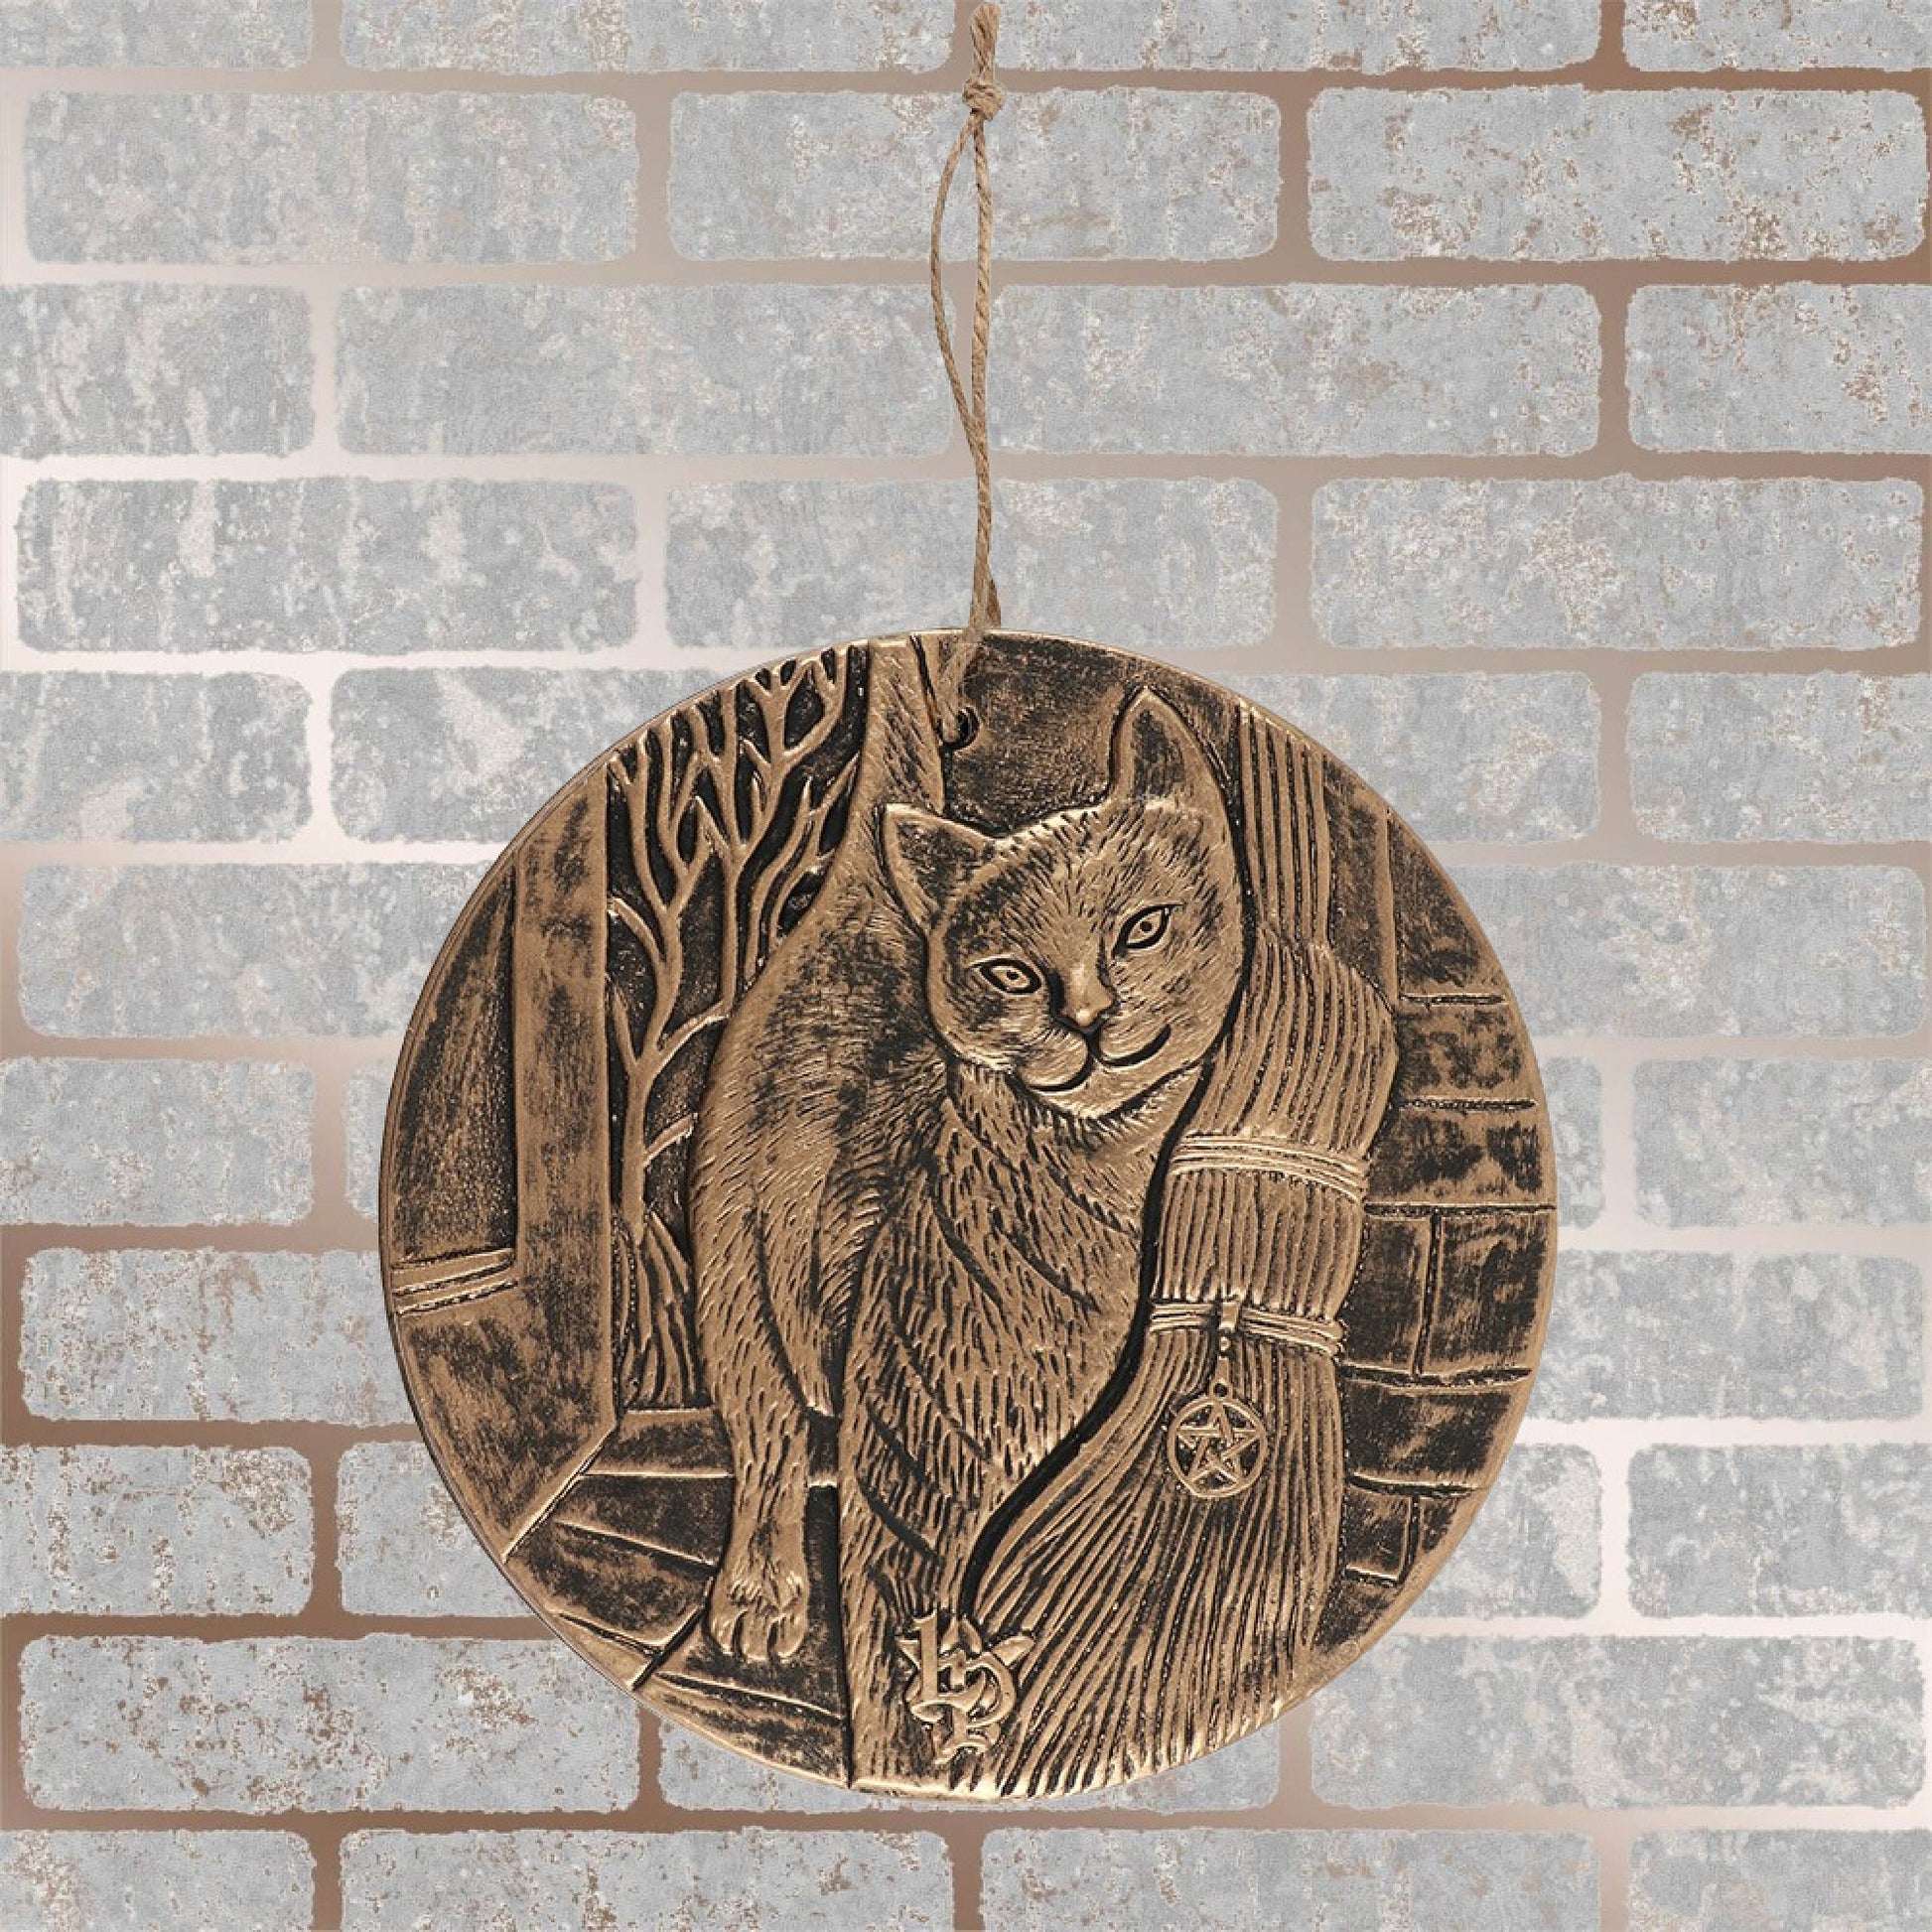 Finished with a bronze paint, these stunning terracotta wall plaques depict Lisa Parkers A Brush With Magic artwork featuring a cat and witches broom. 20cm in diameter